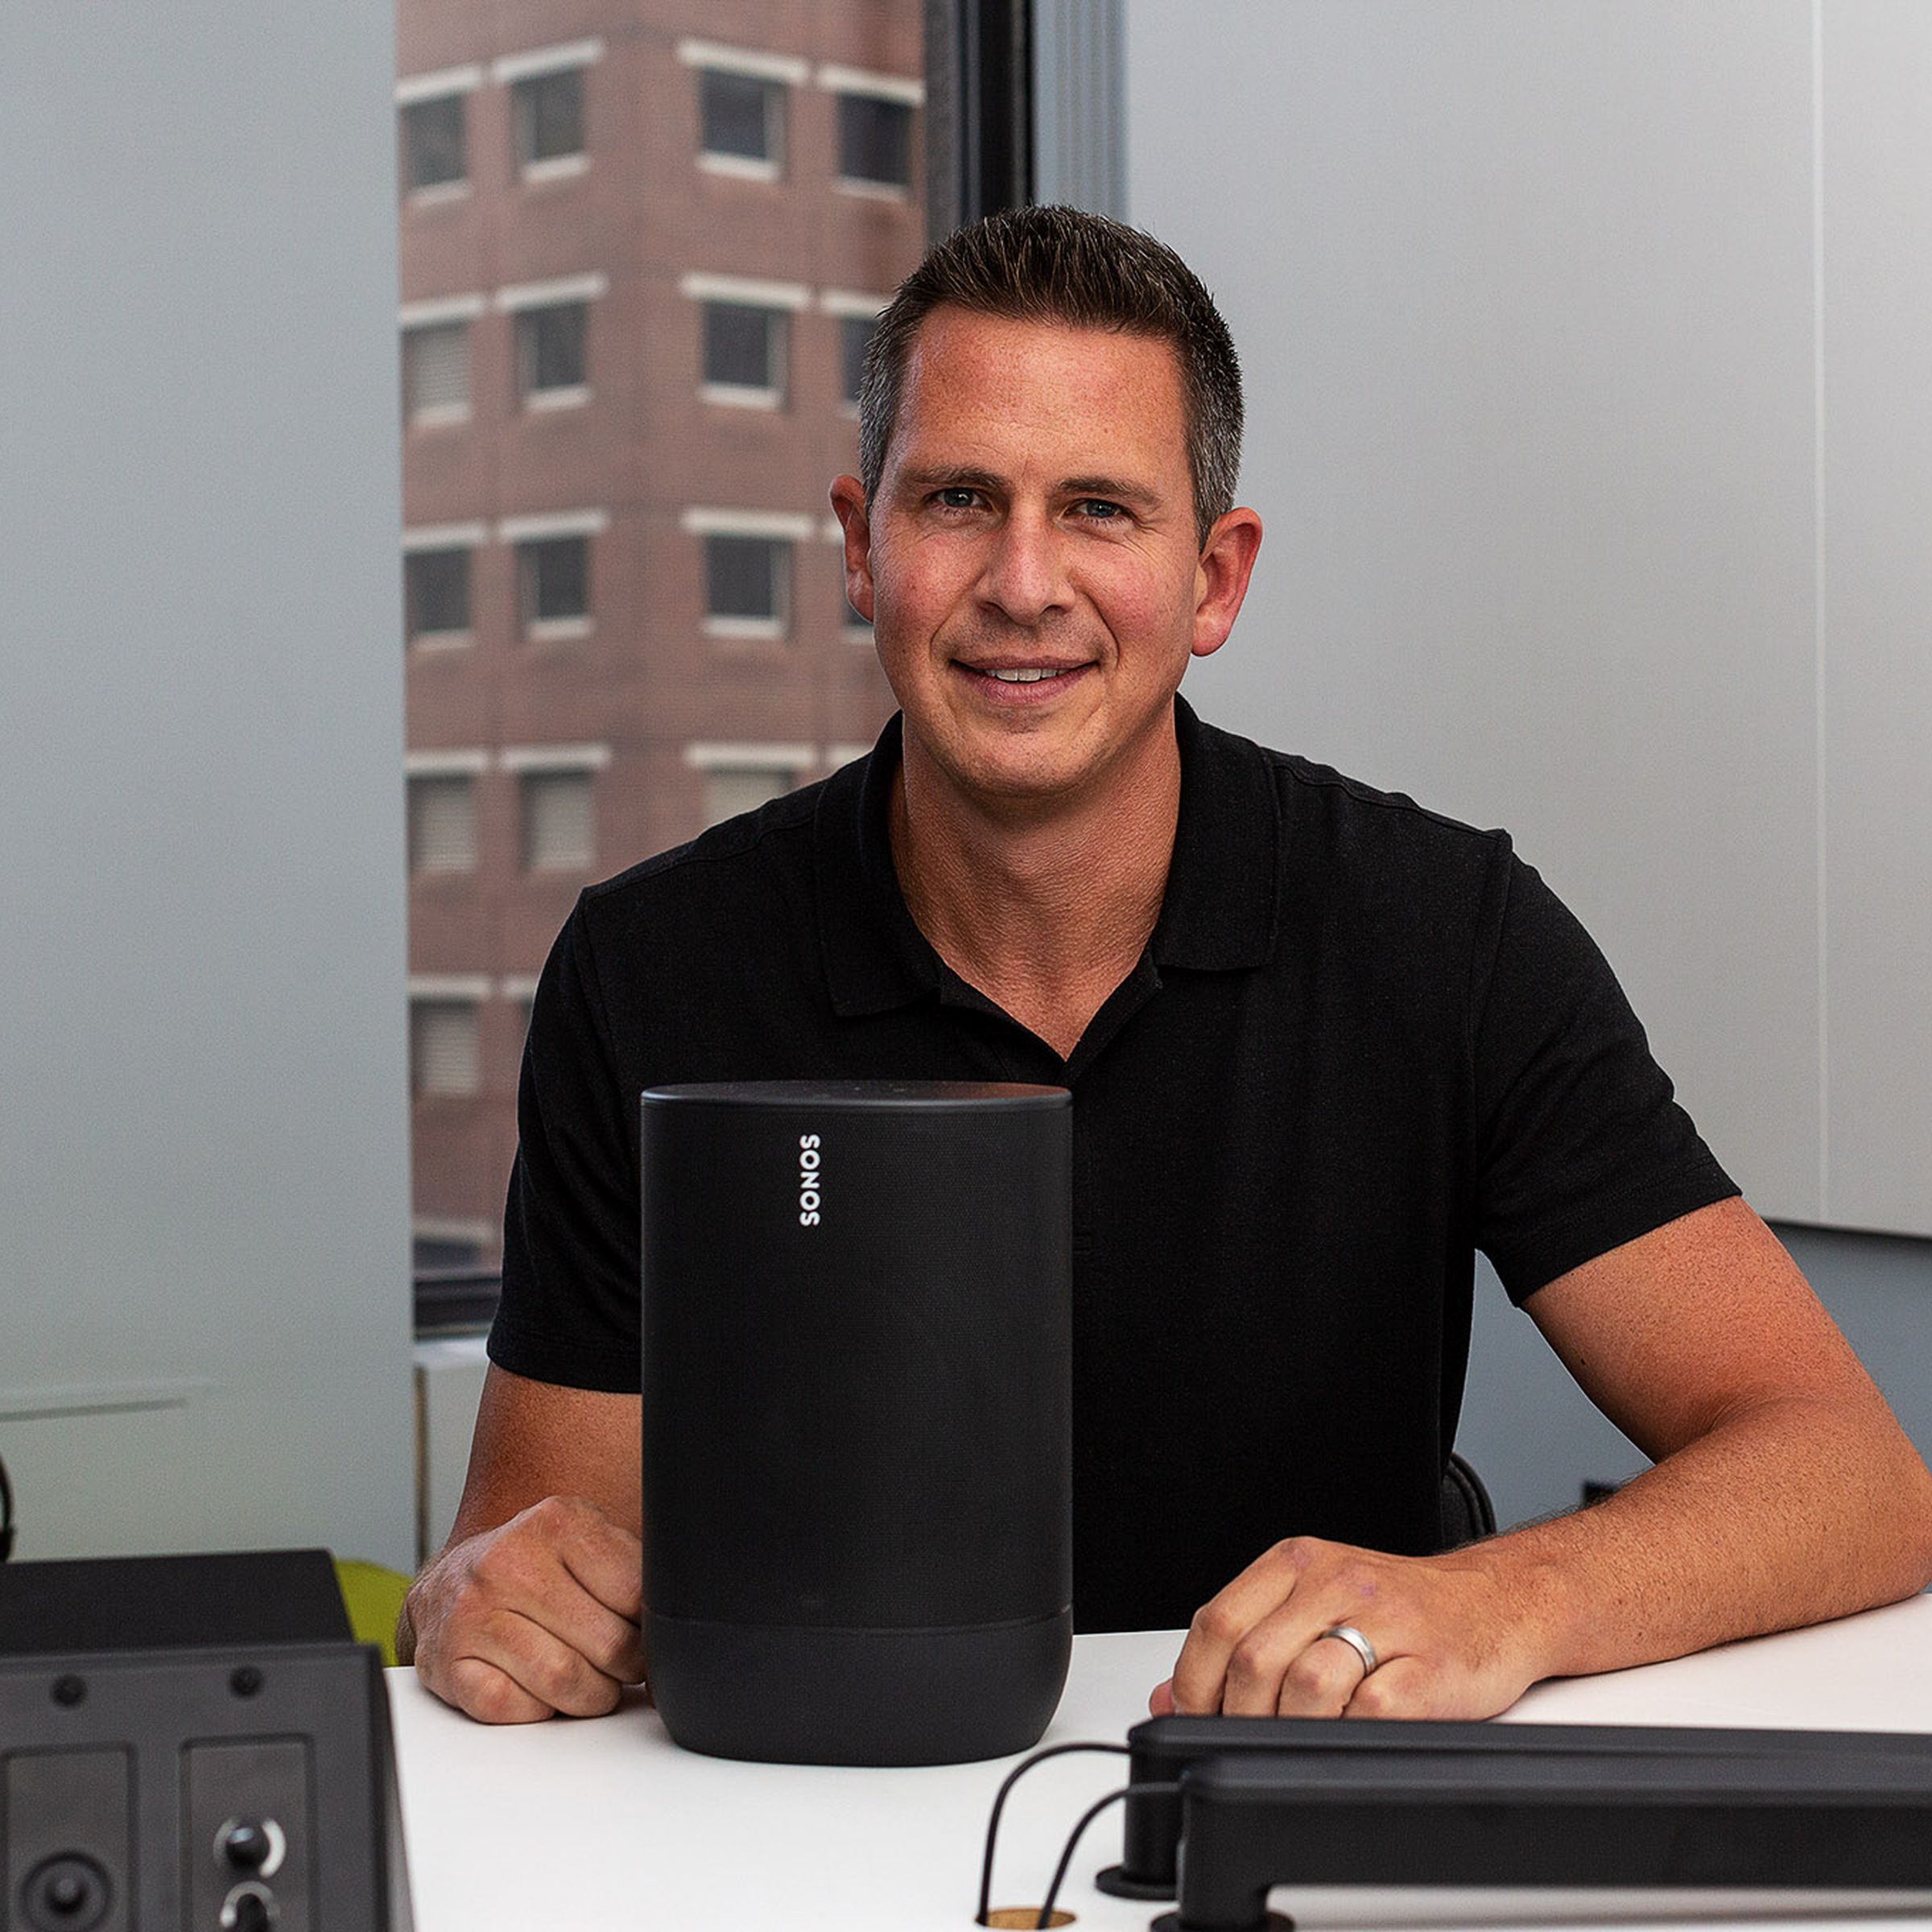 Sonos CEO Patrick Spence in August 2019, showing the then-new Sonos Move speaker.